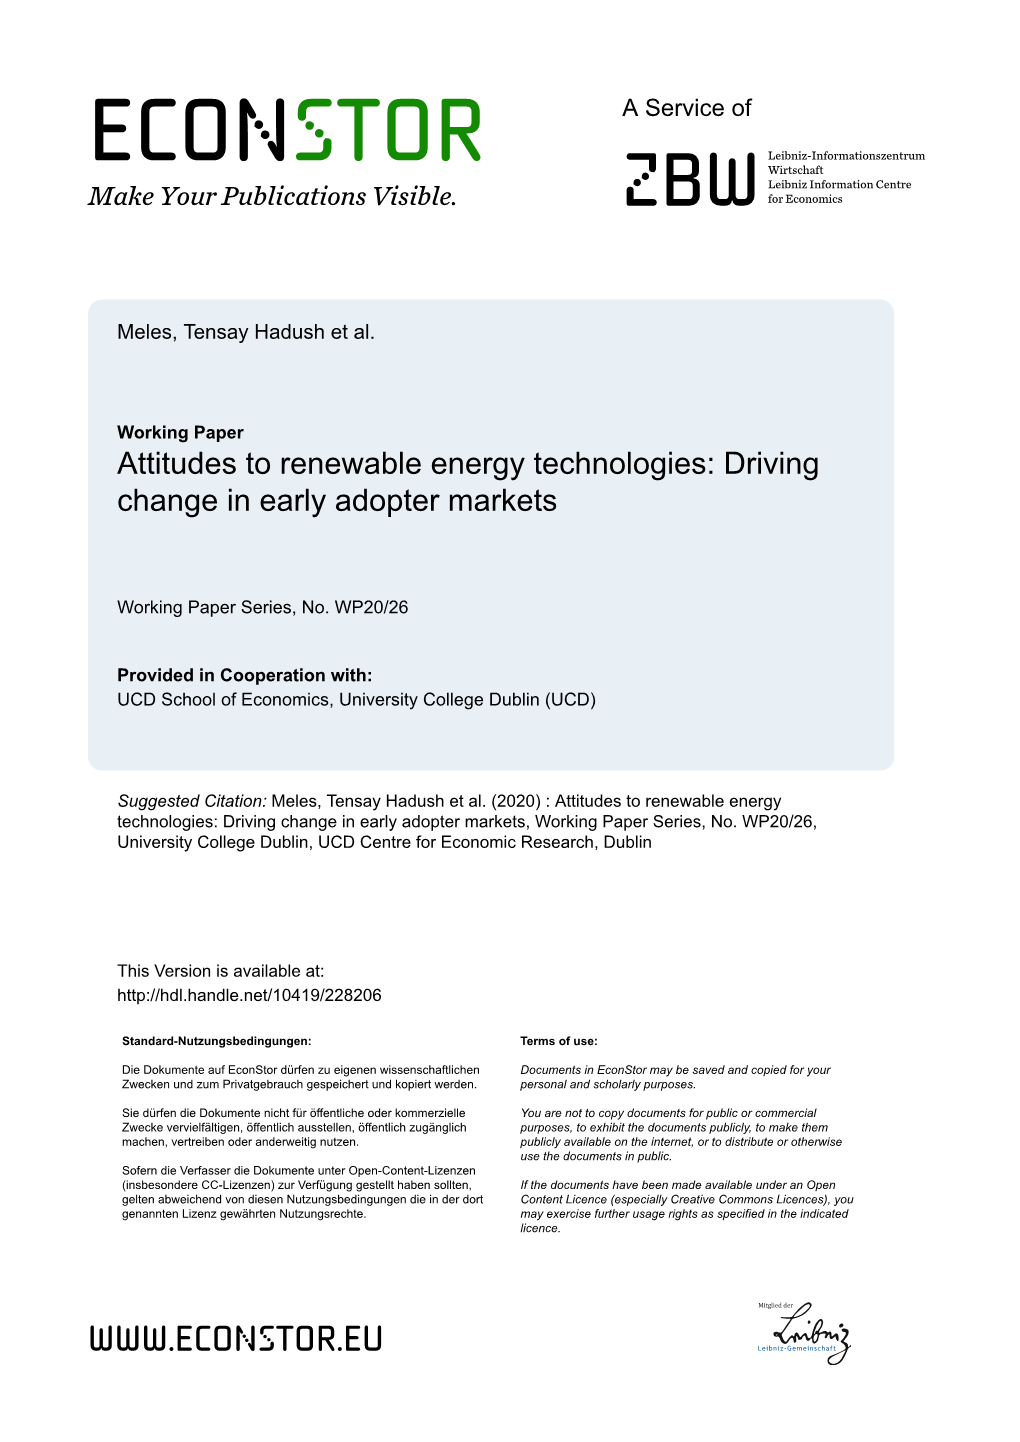 Attitudes to Renewable Energy Technologies: Driving Change in Early Adopter Markets